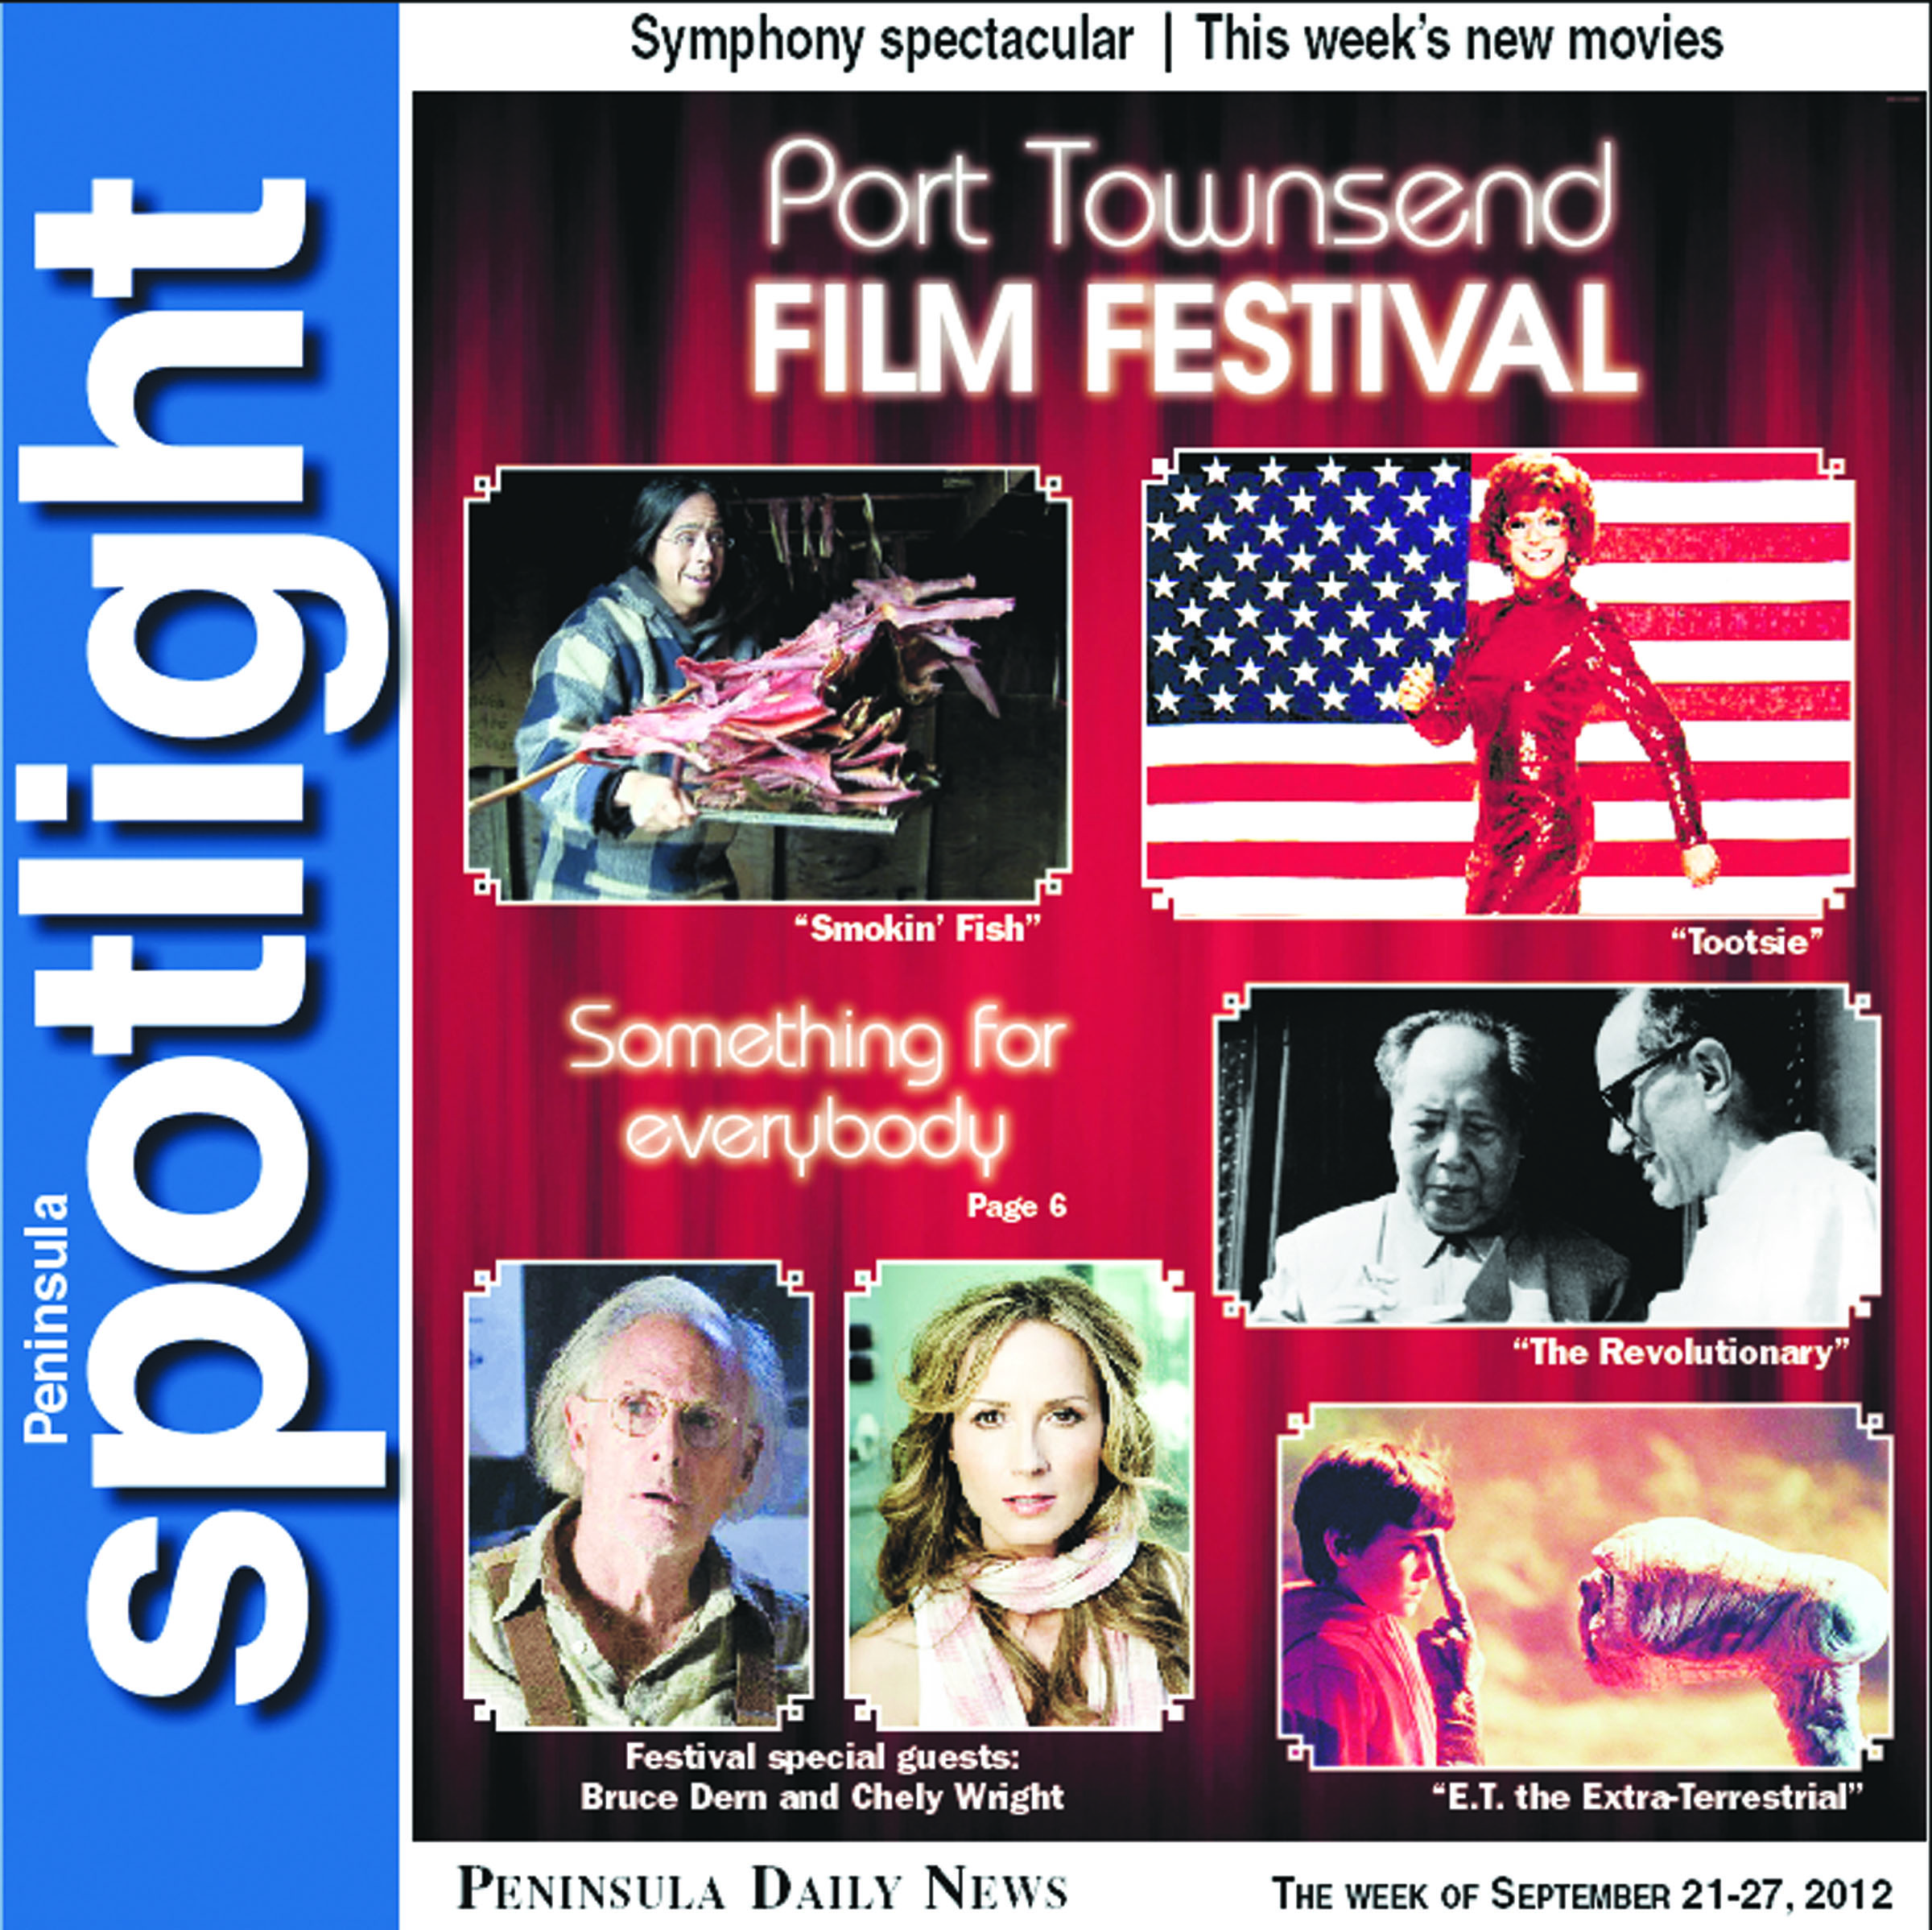 WEEKEND — Port Townsend Film Festival's dazzling lineup